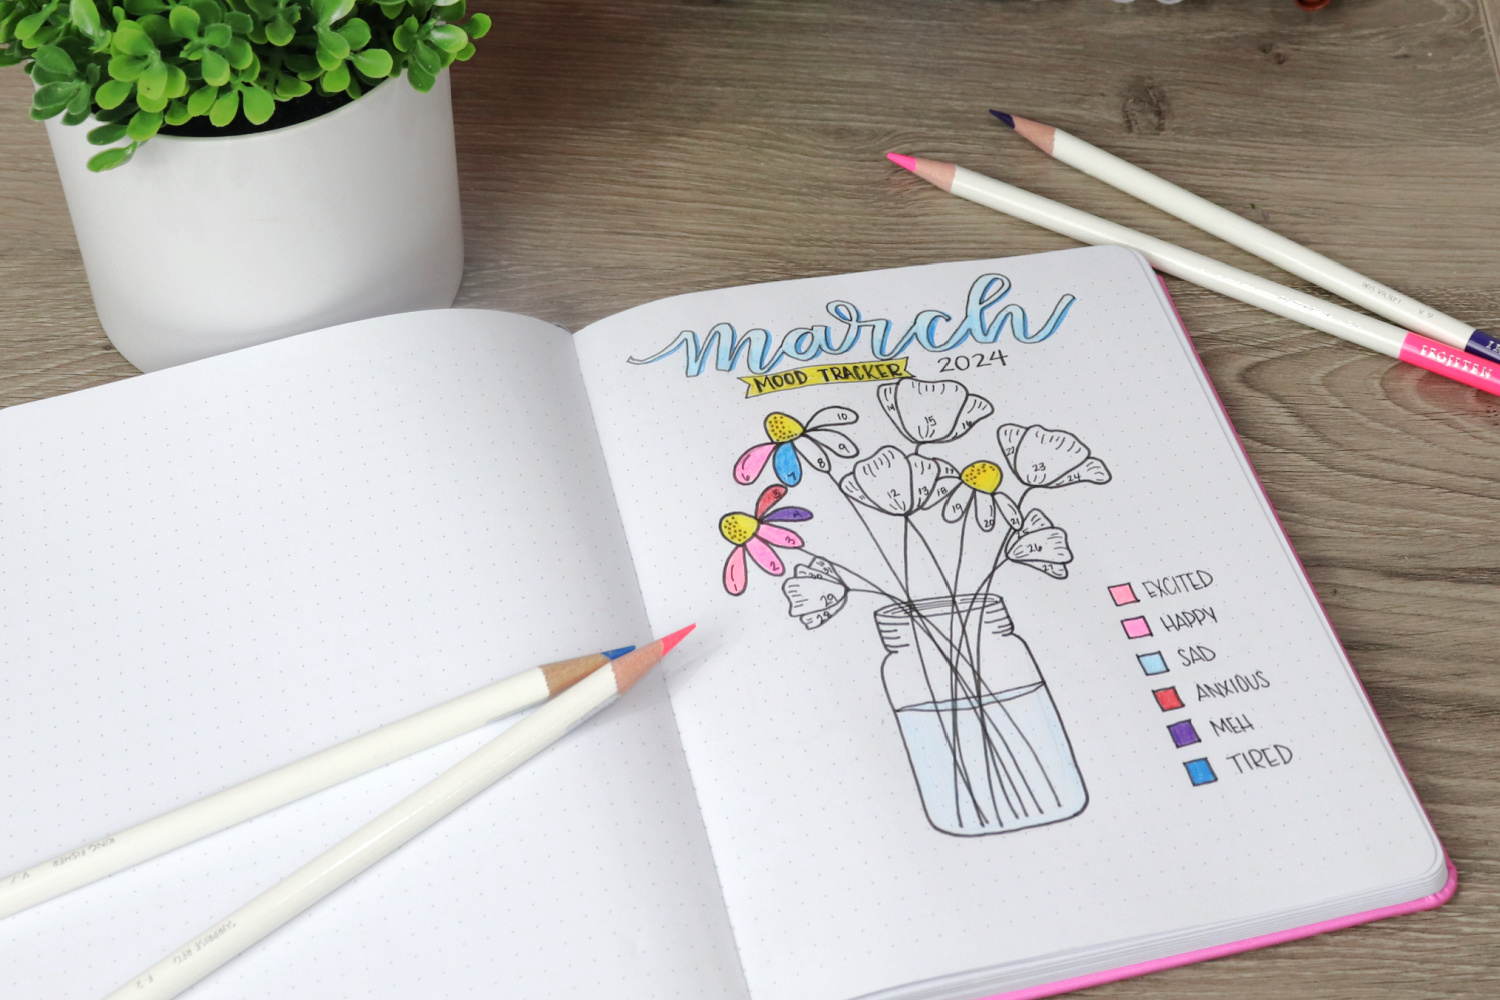 Image contains an open sketchbook with a floral bouquet mood tracker on the page. Four colored pencils lay around the book, and a faux plant sits above it on a wooden desk.